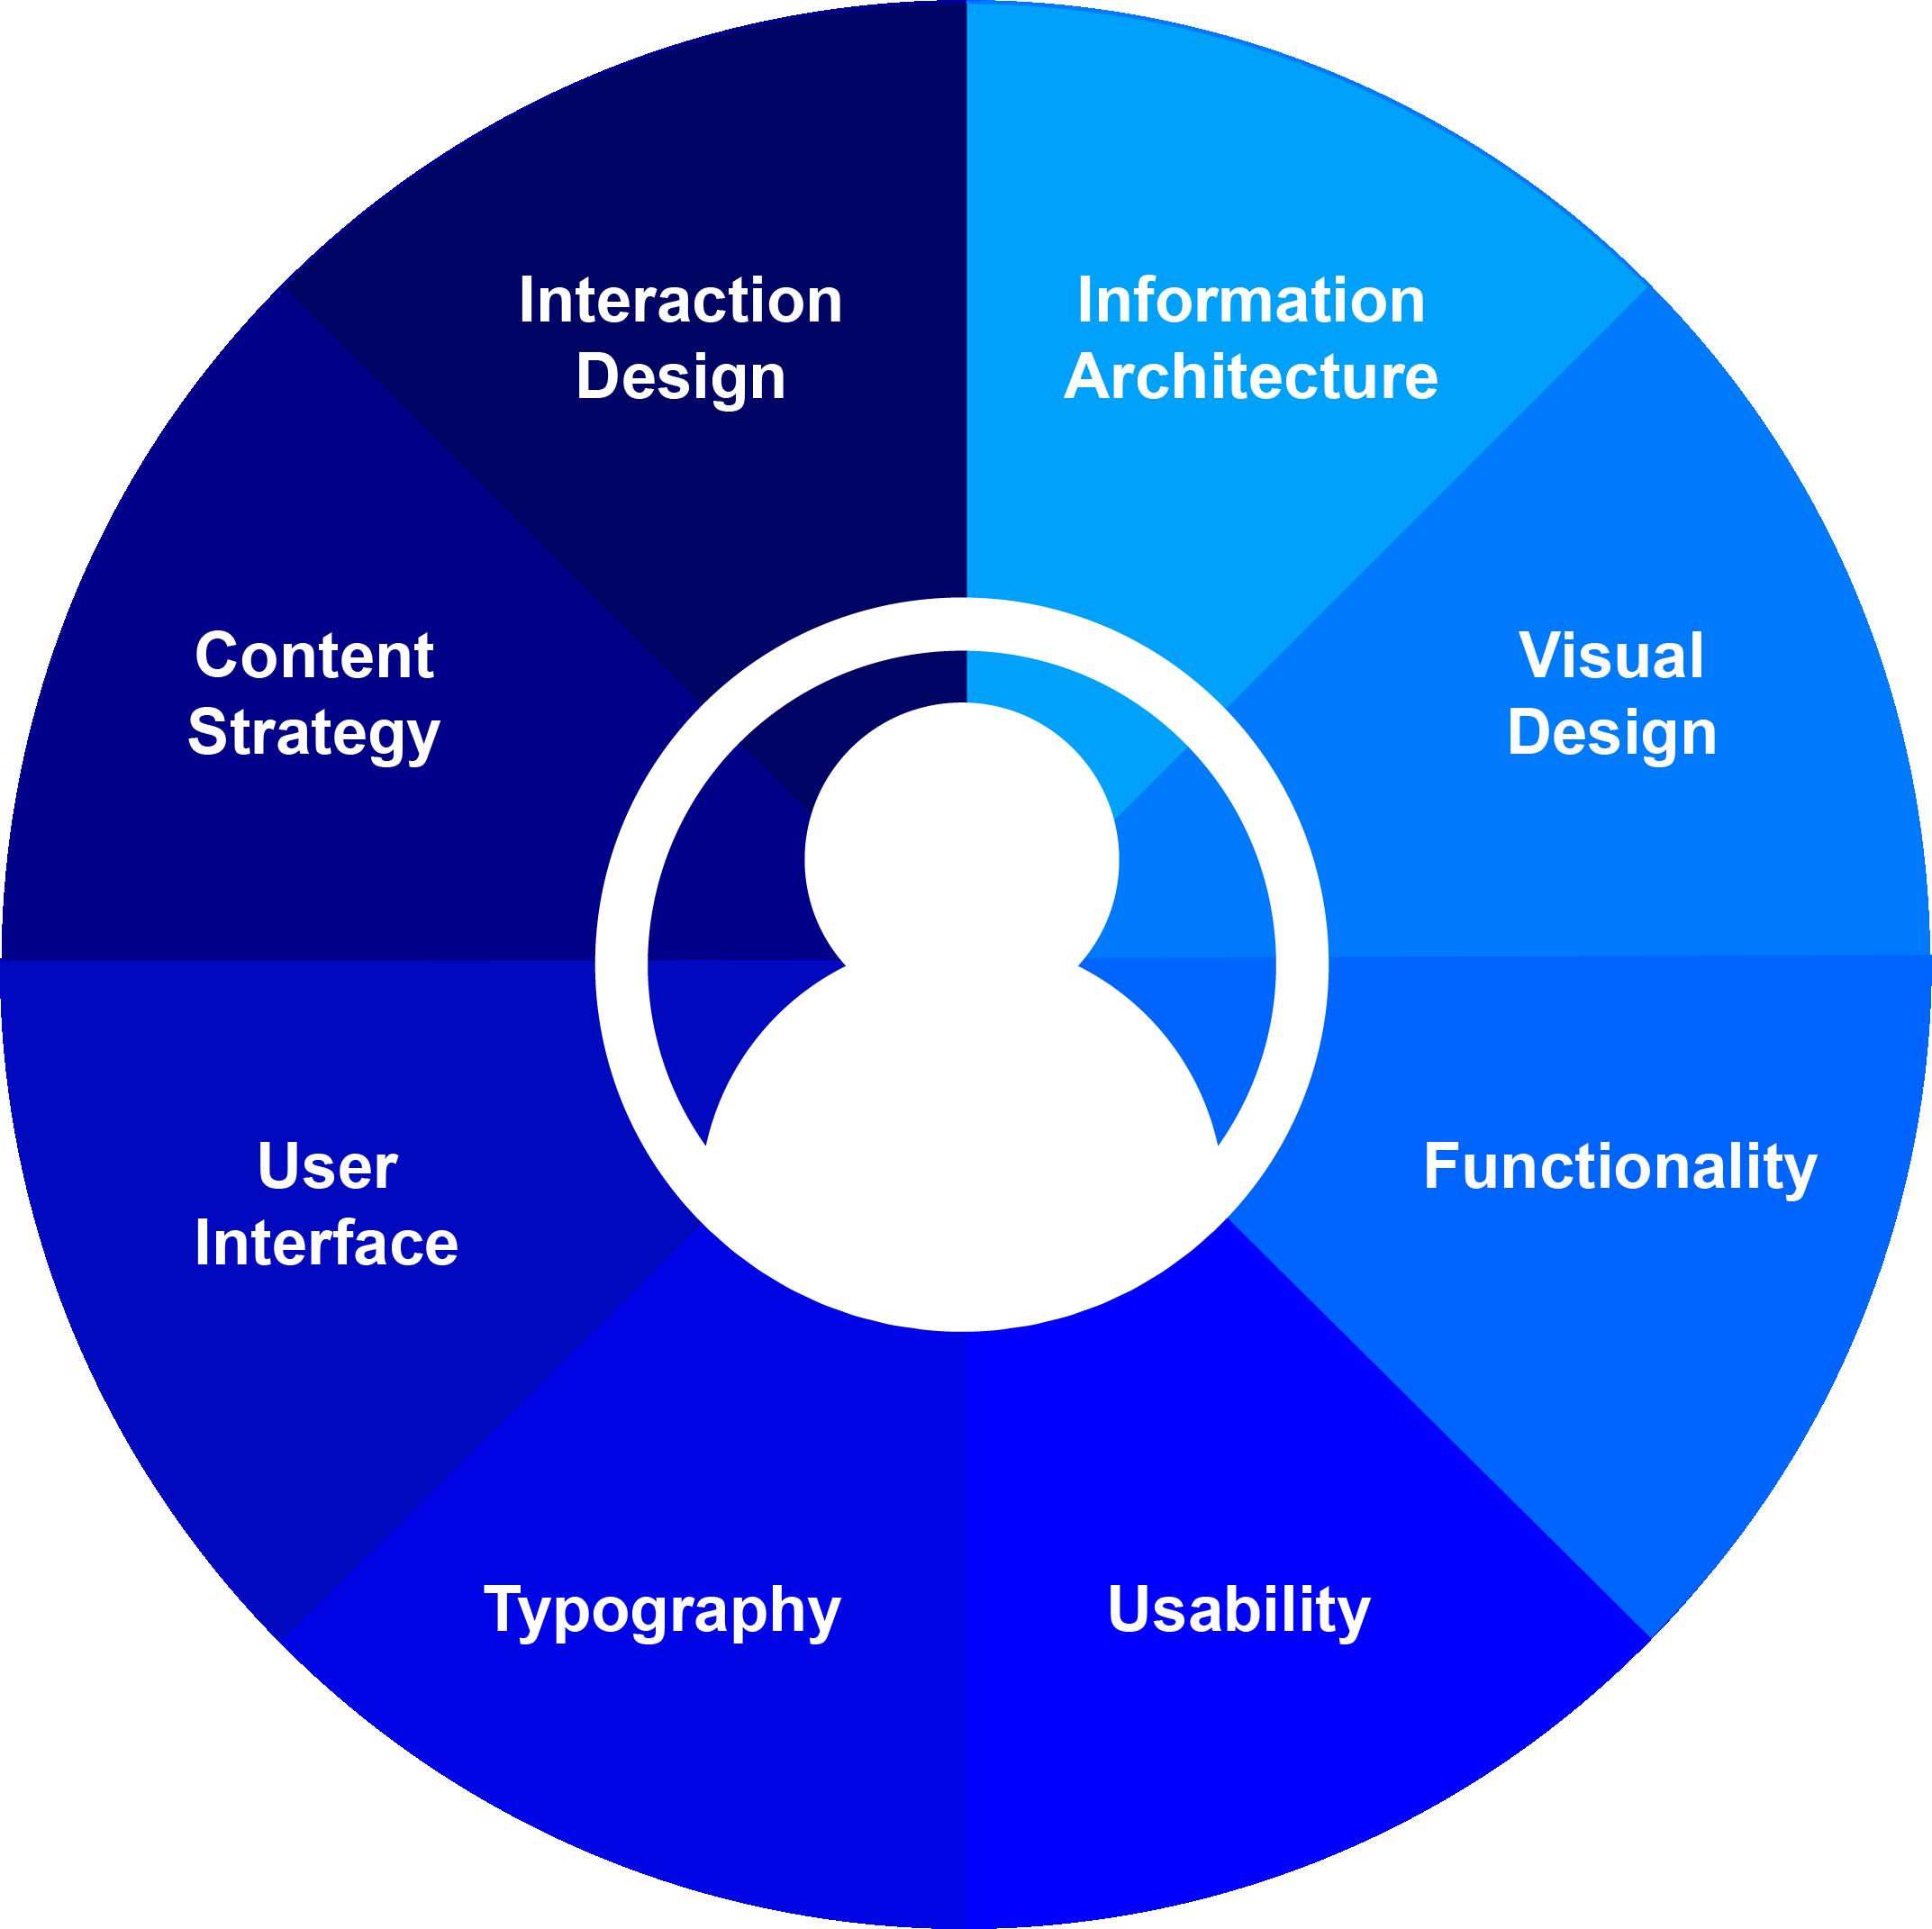 UX Design - the circle with the four components of the user interface